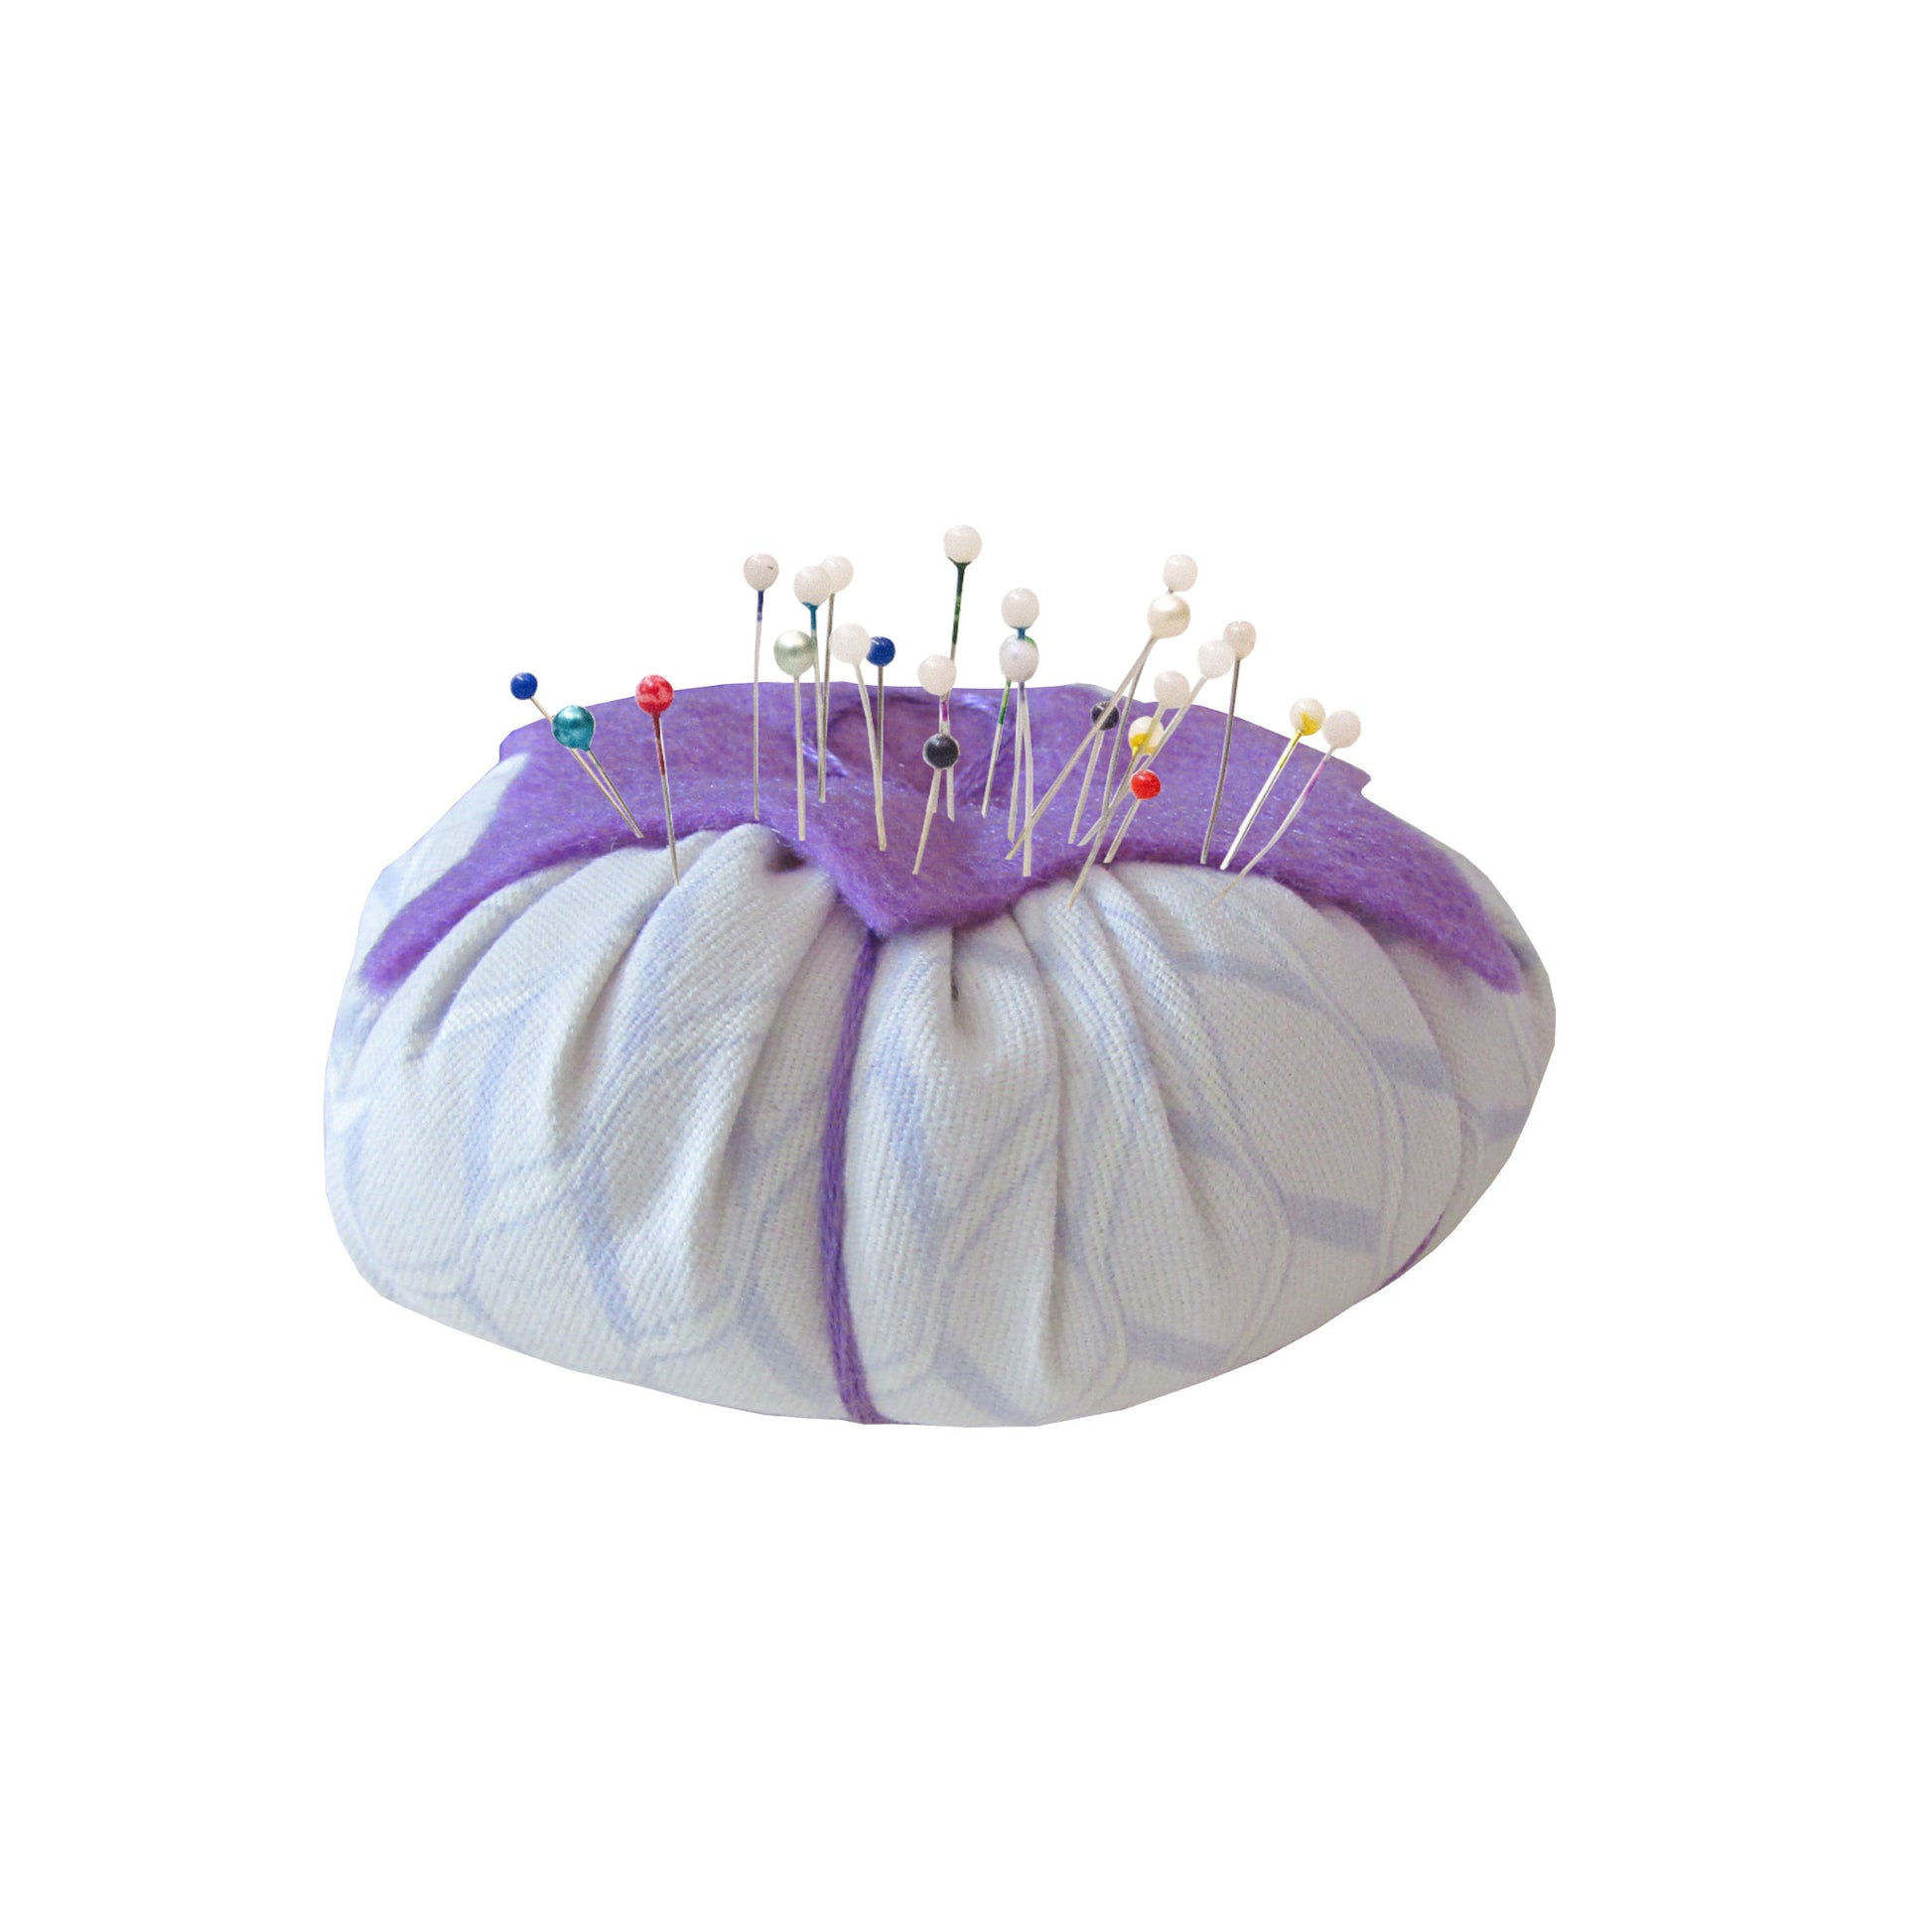 Lavender Top Periwinkle Print Tomato Pincushion with pins